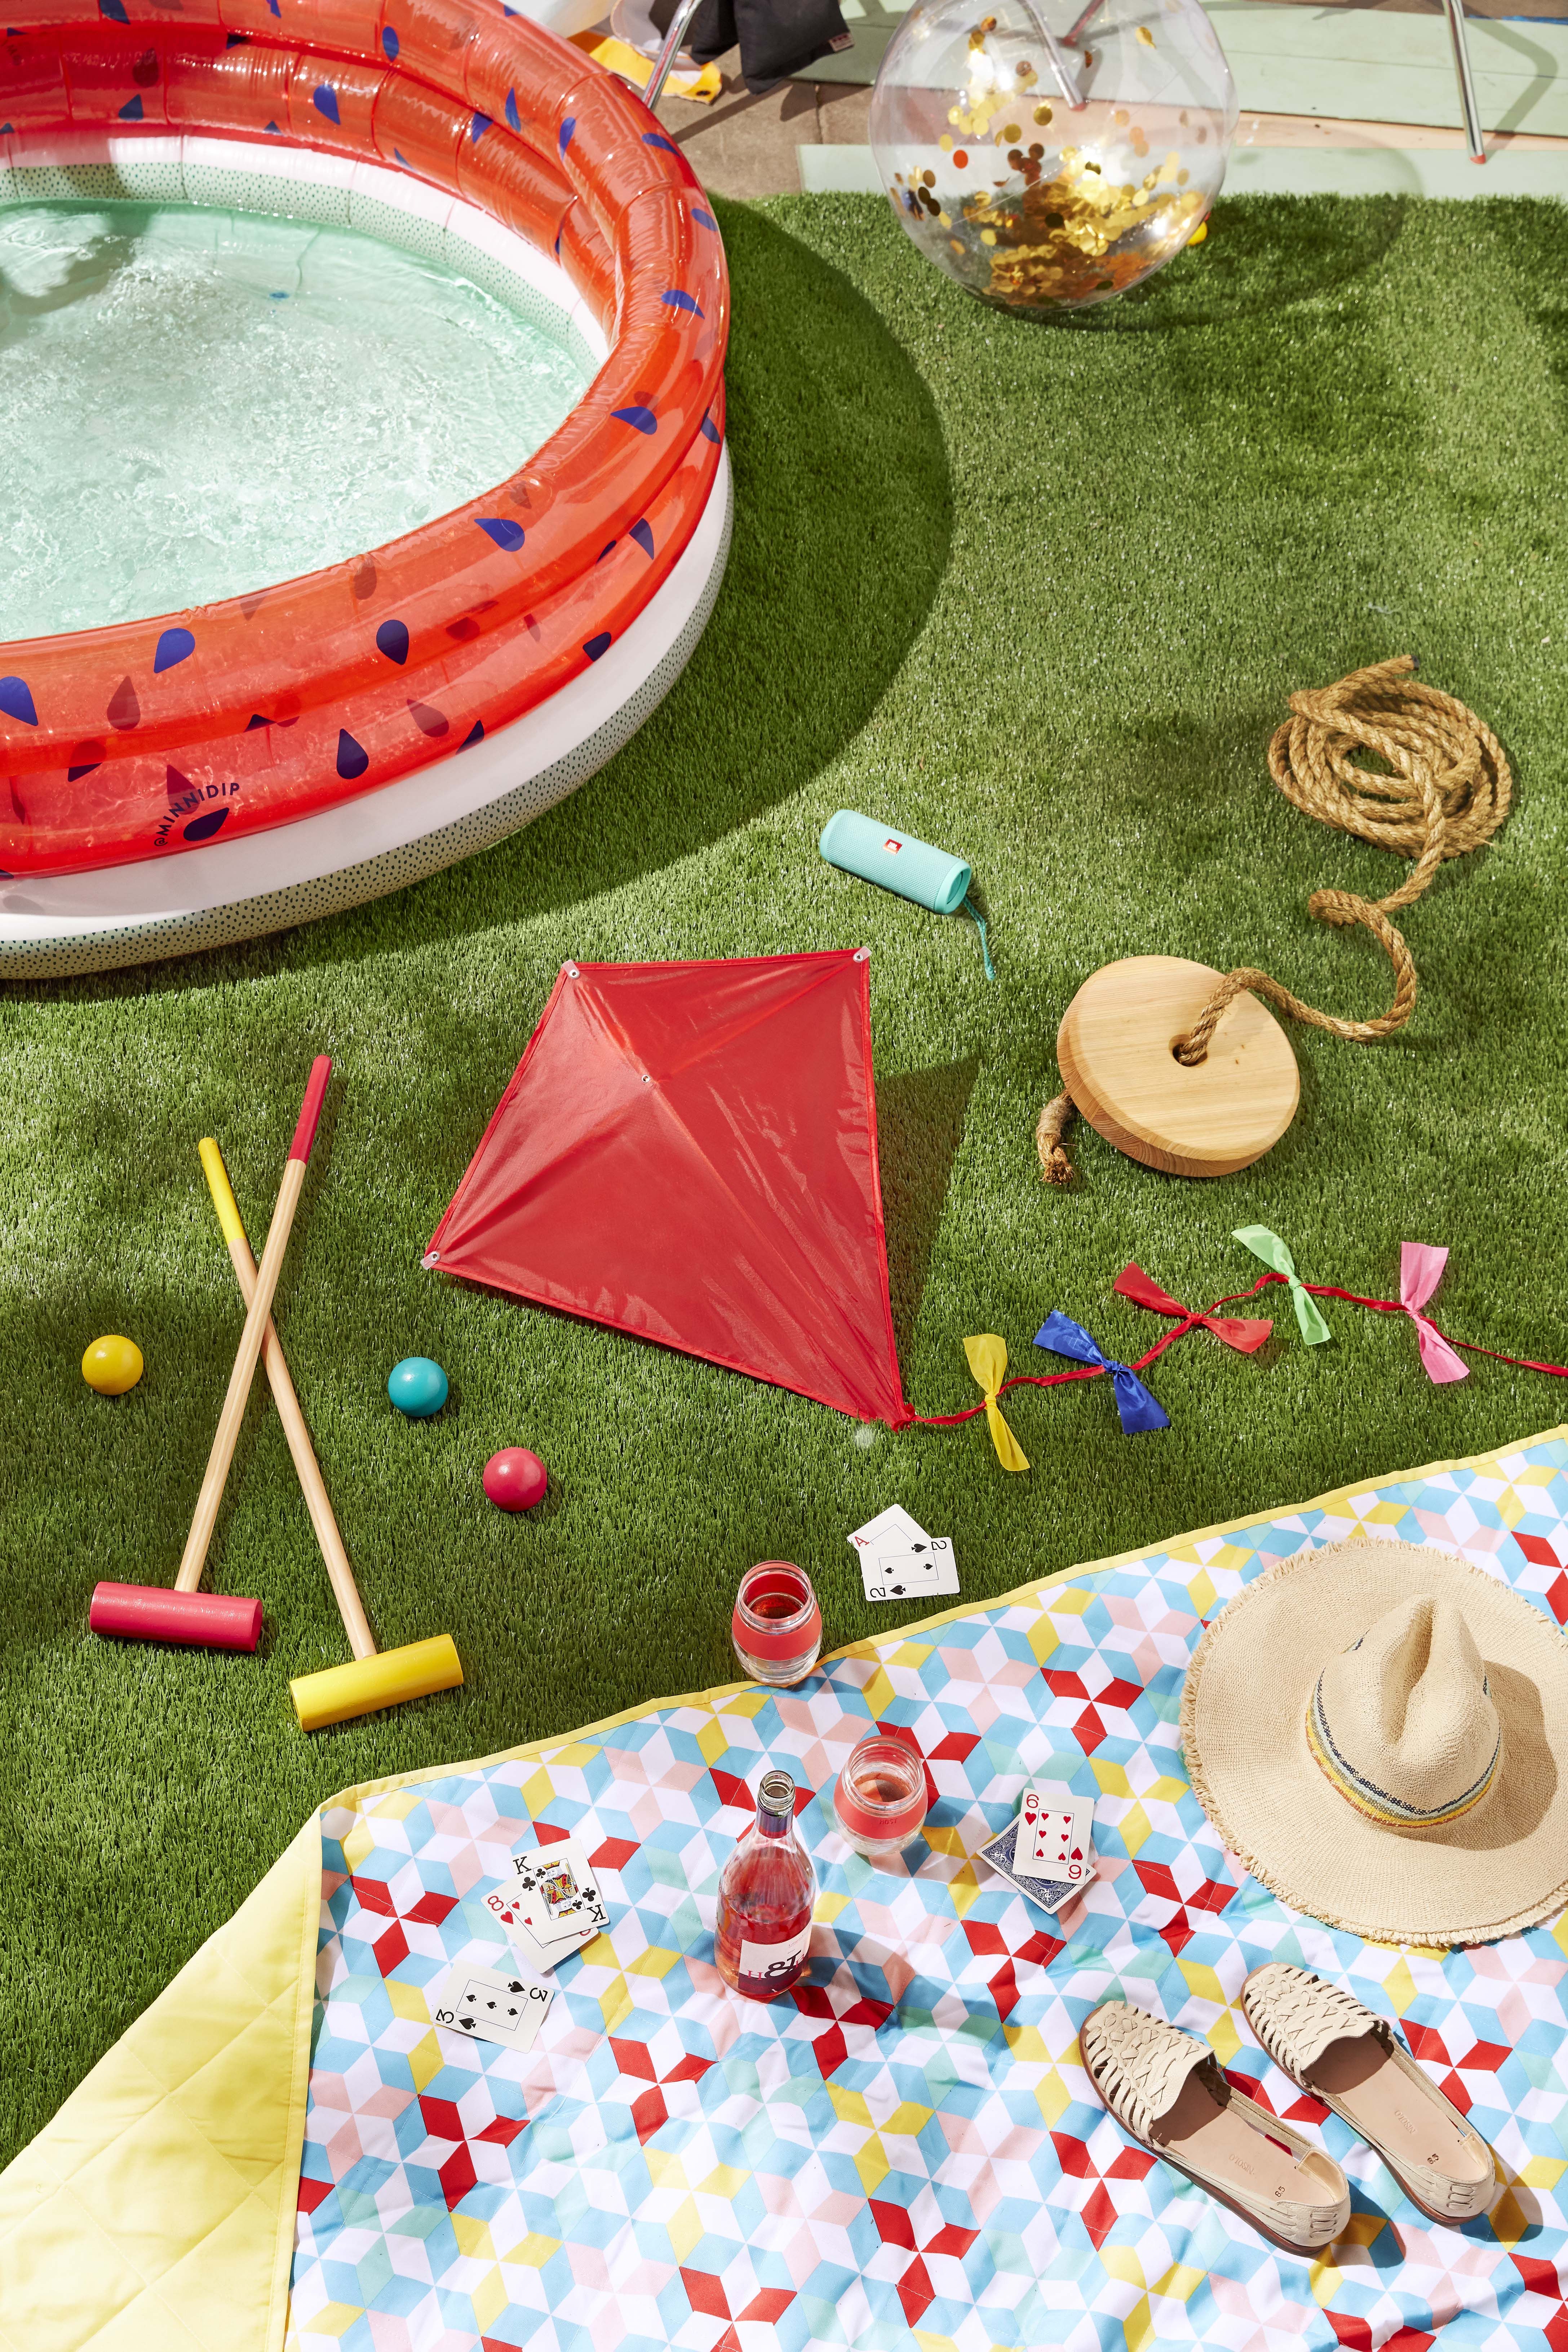 Summertime Fun: 12 Games to Play Outside